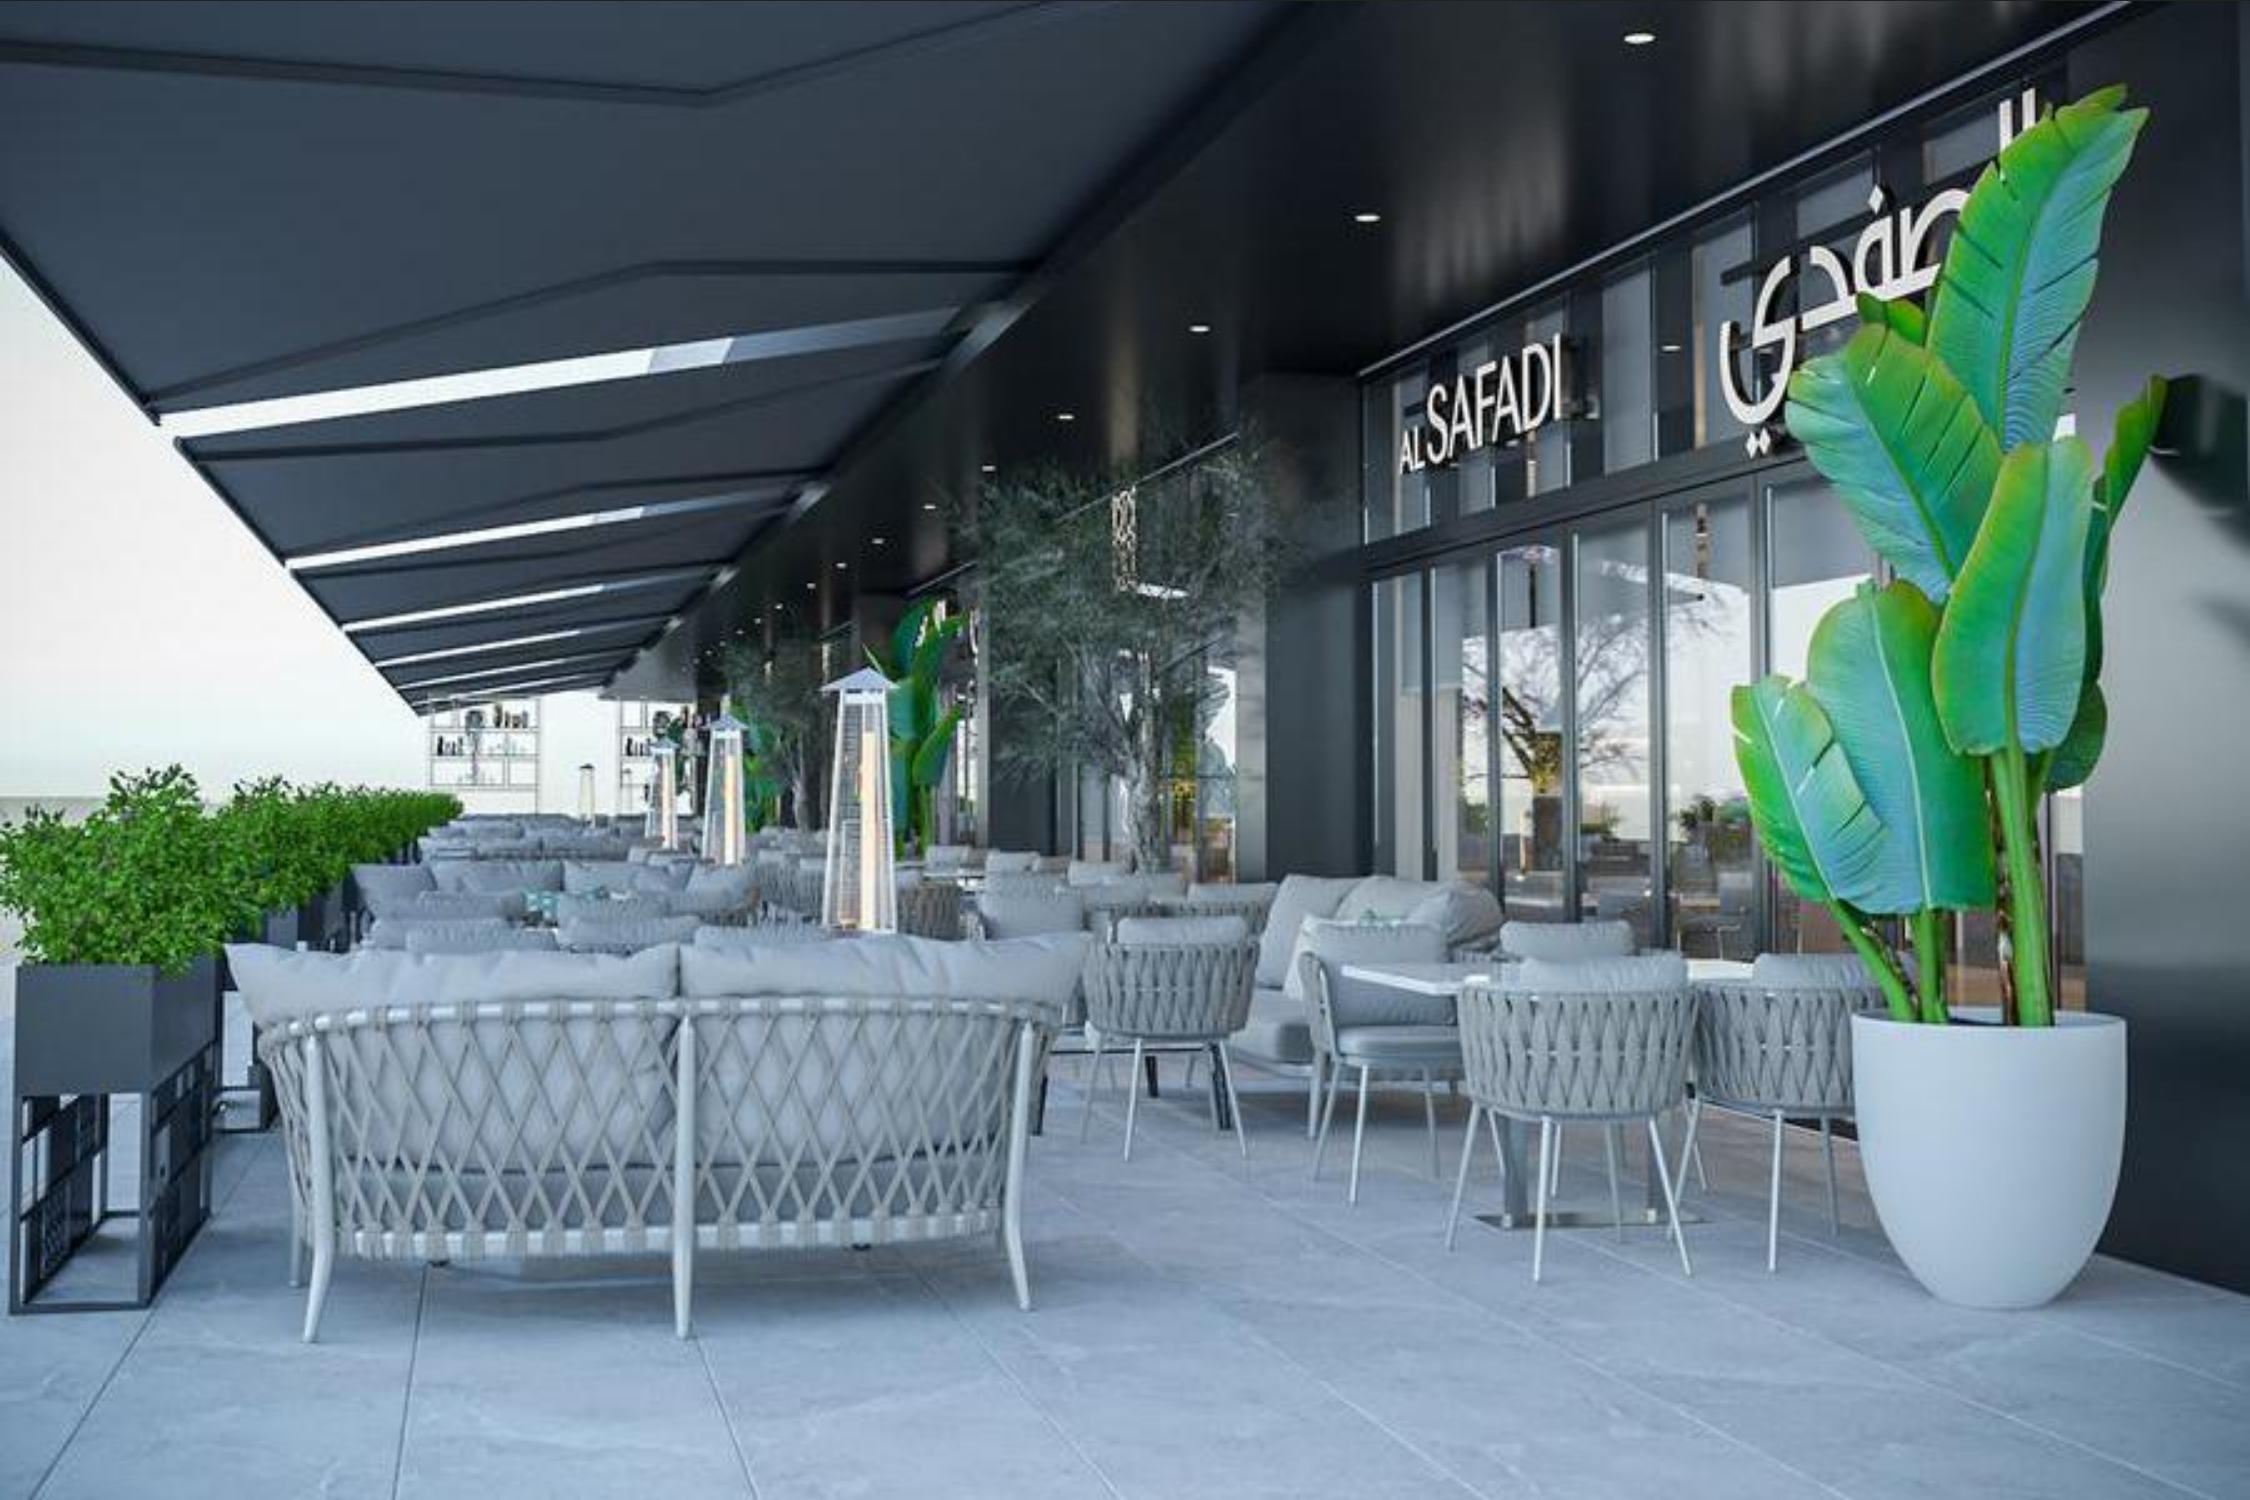 | al safadi restaurant to open its first branch in abu dhabi | 2